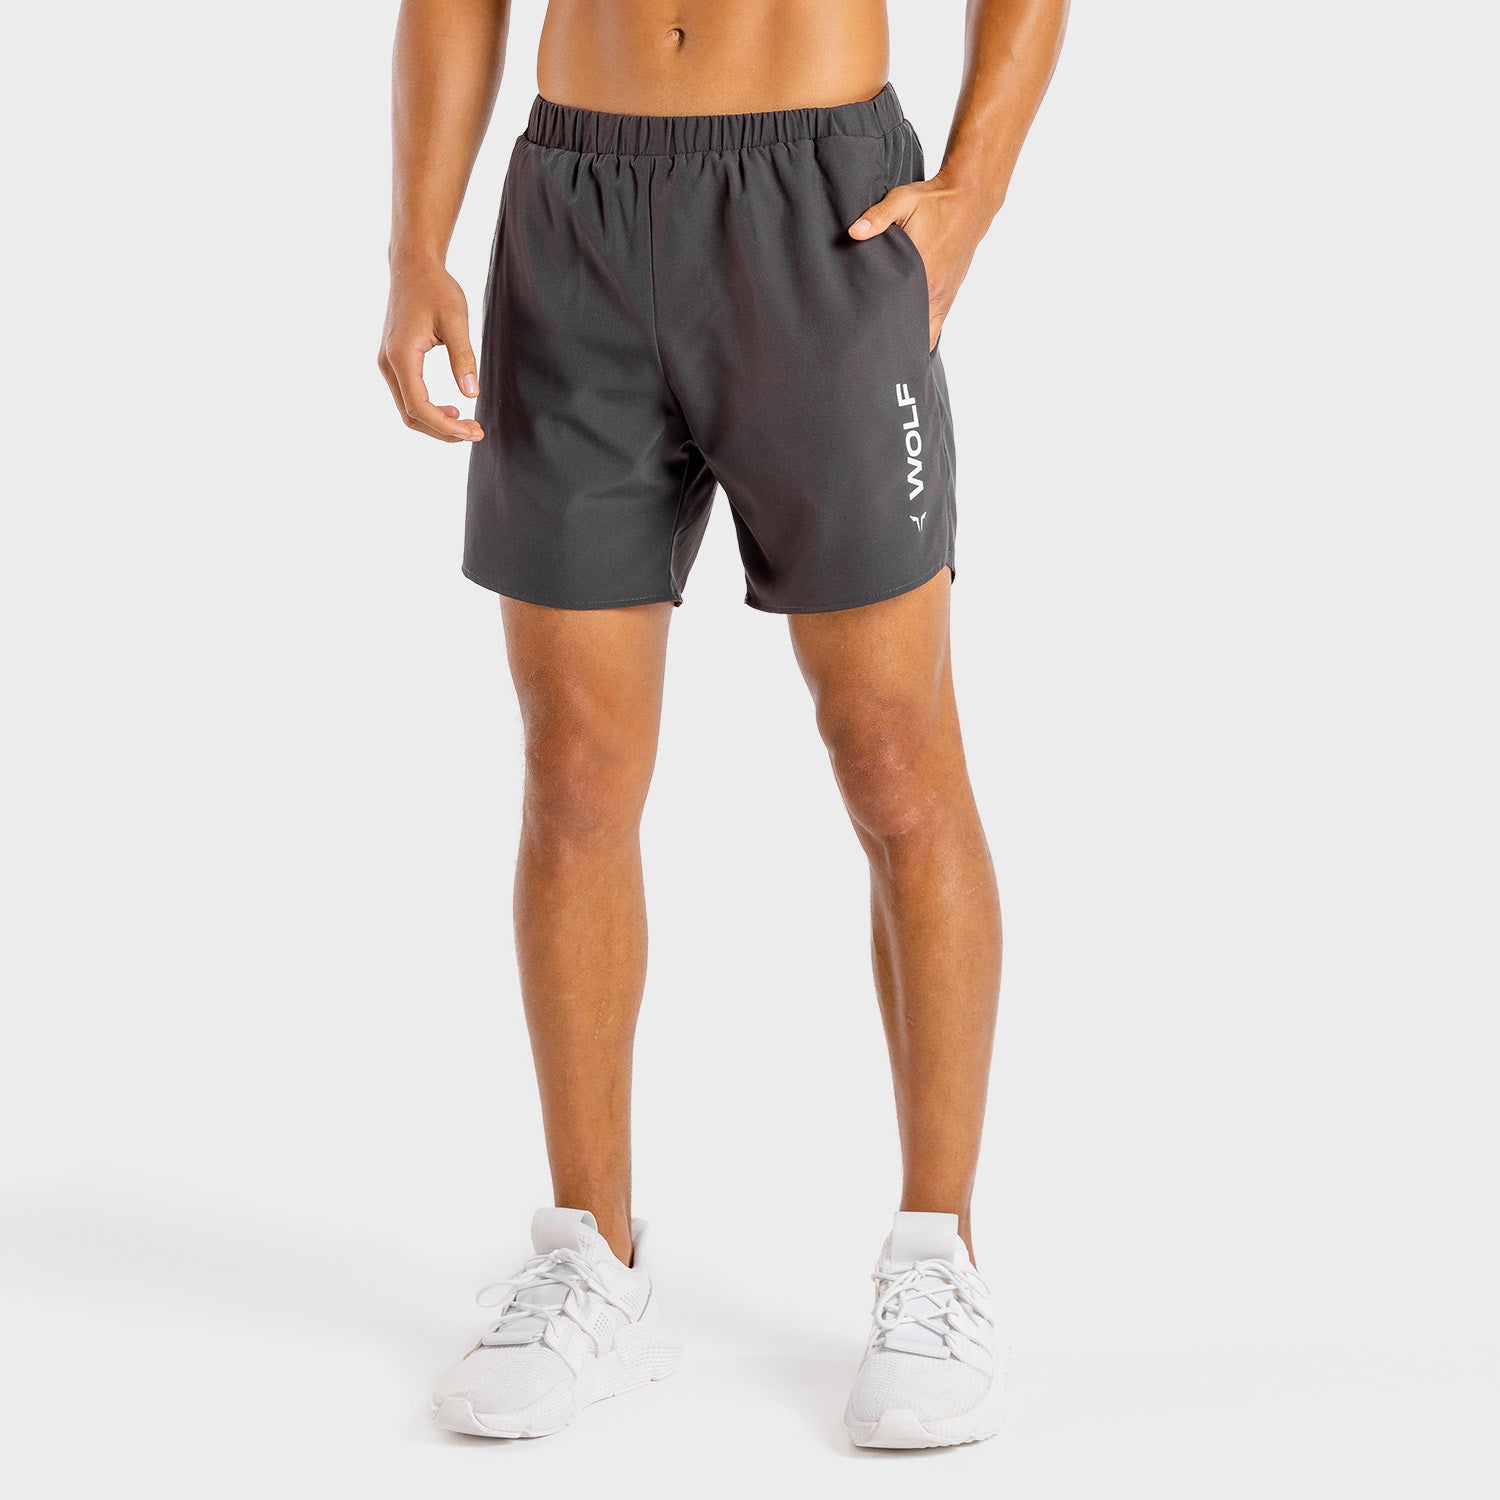 squatwolf-gym-wear-primal-shorts-charcoal-workout-shorts-for-men